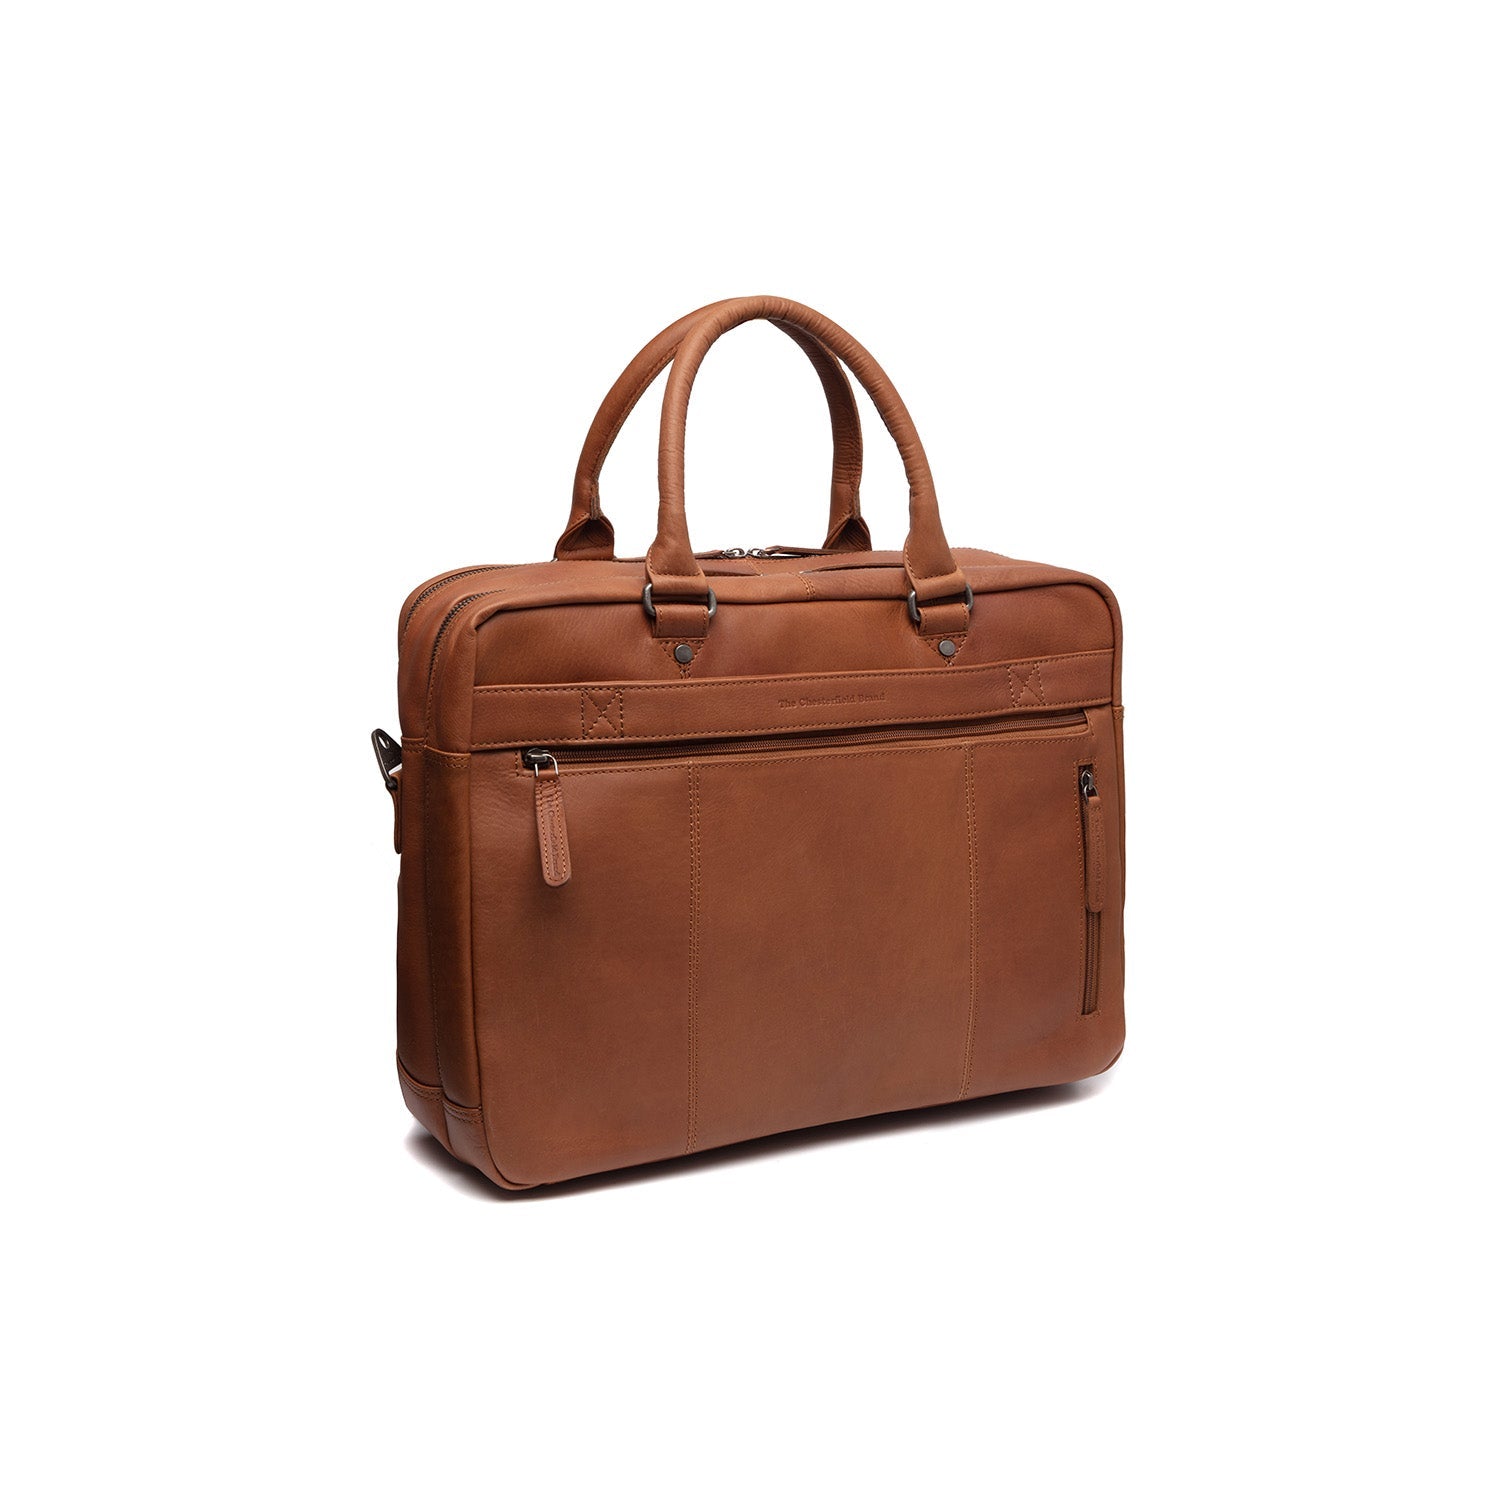 Leather Laptop Bag - The Chesterfield Brand Boston Cognac